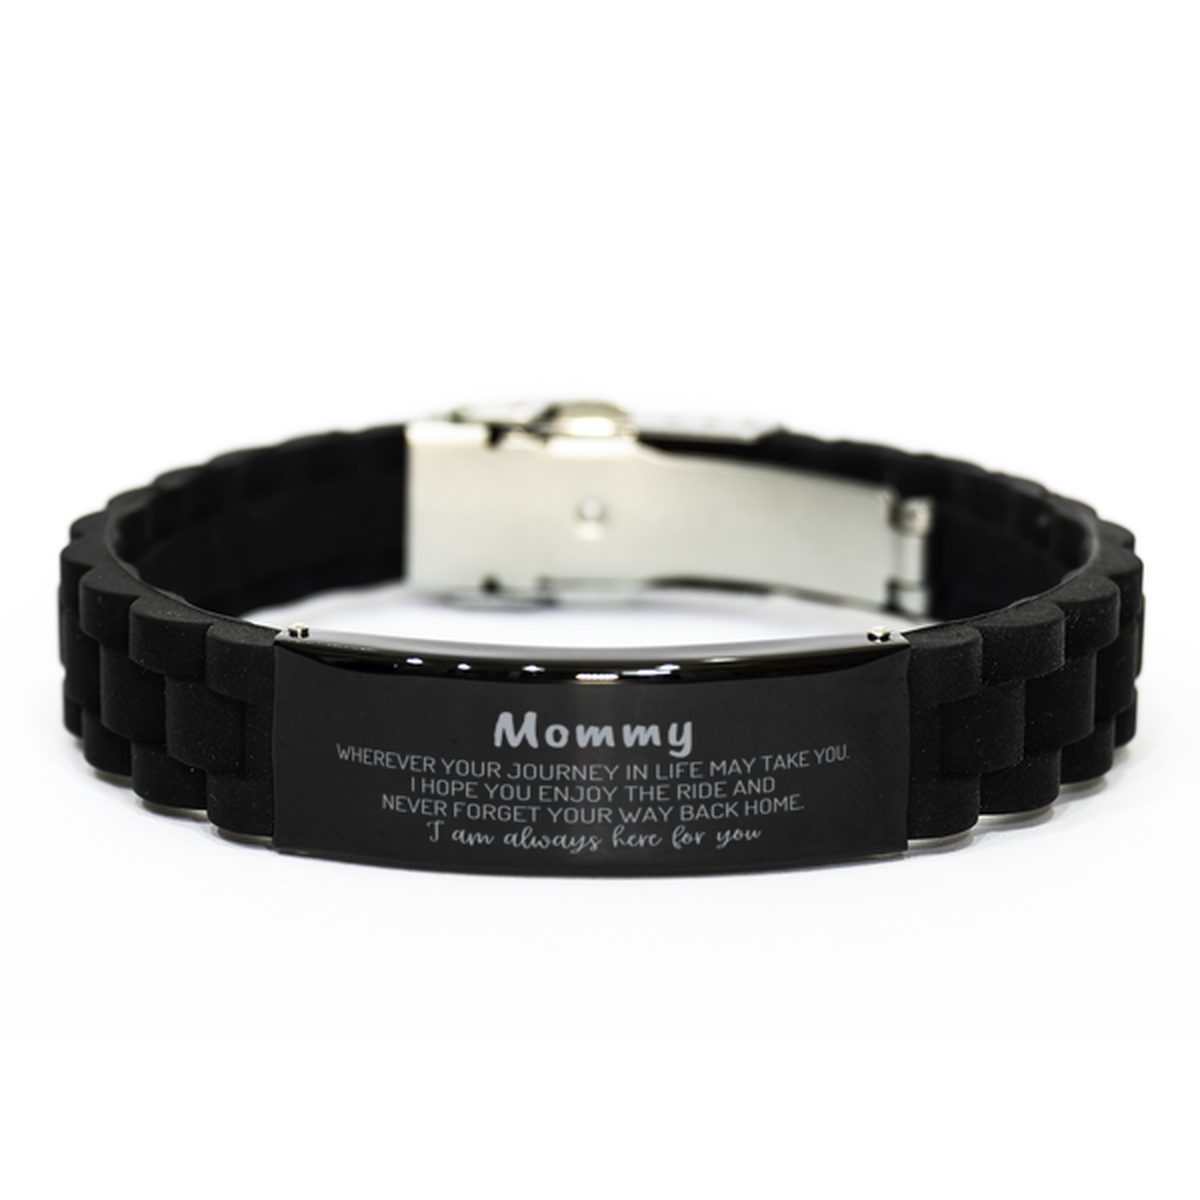 Mommy wherever your journey in life may take you, I am always here for you Mommy Black Glidelock Clasp Bracelet, Awesome Christmas Gifts For Mommy, Mommy Birthday Gifts for Men Women Family Loved One